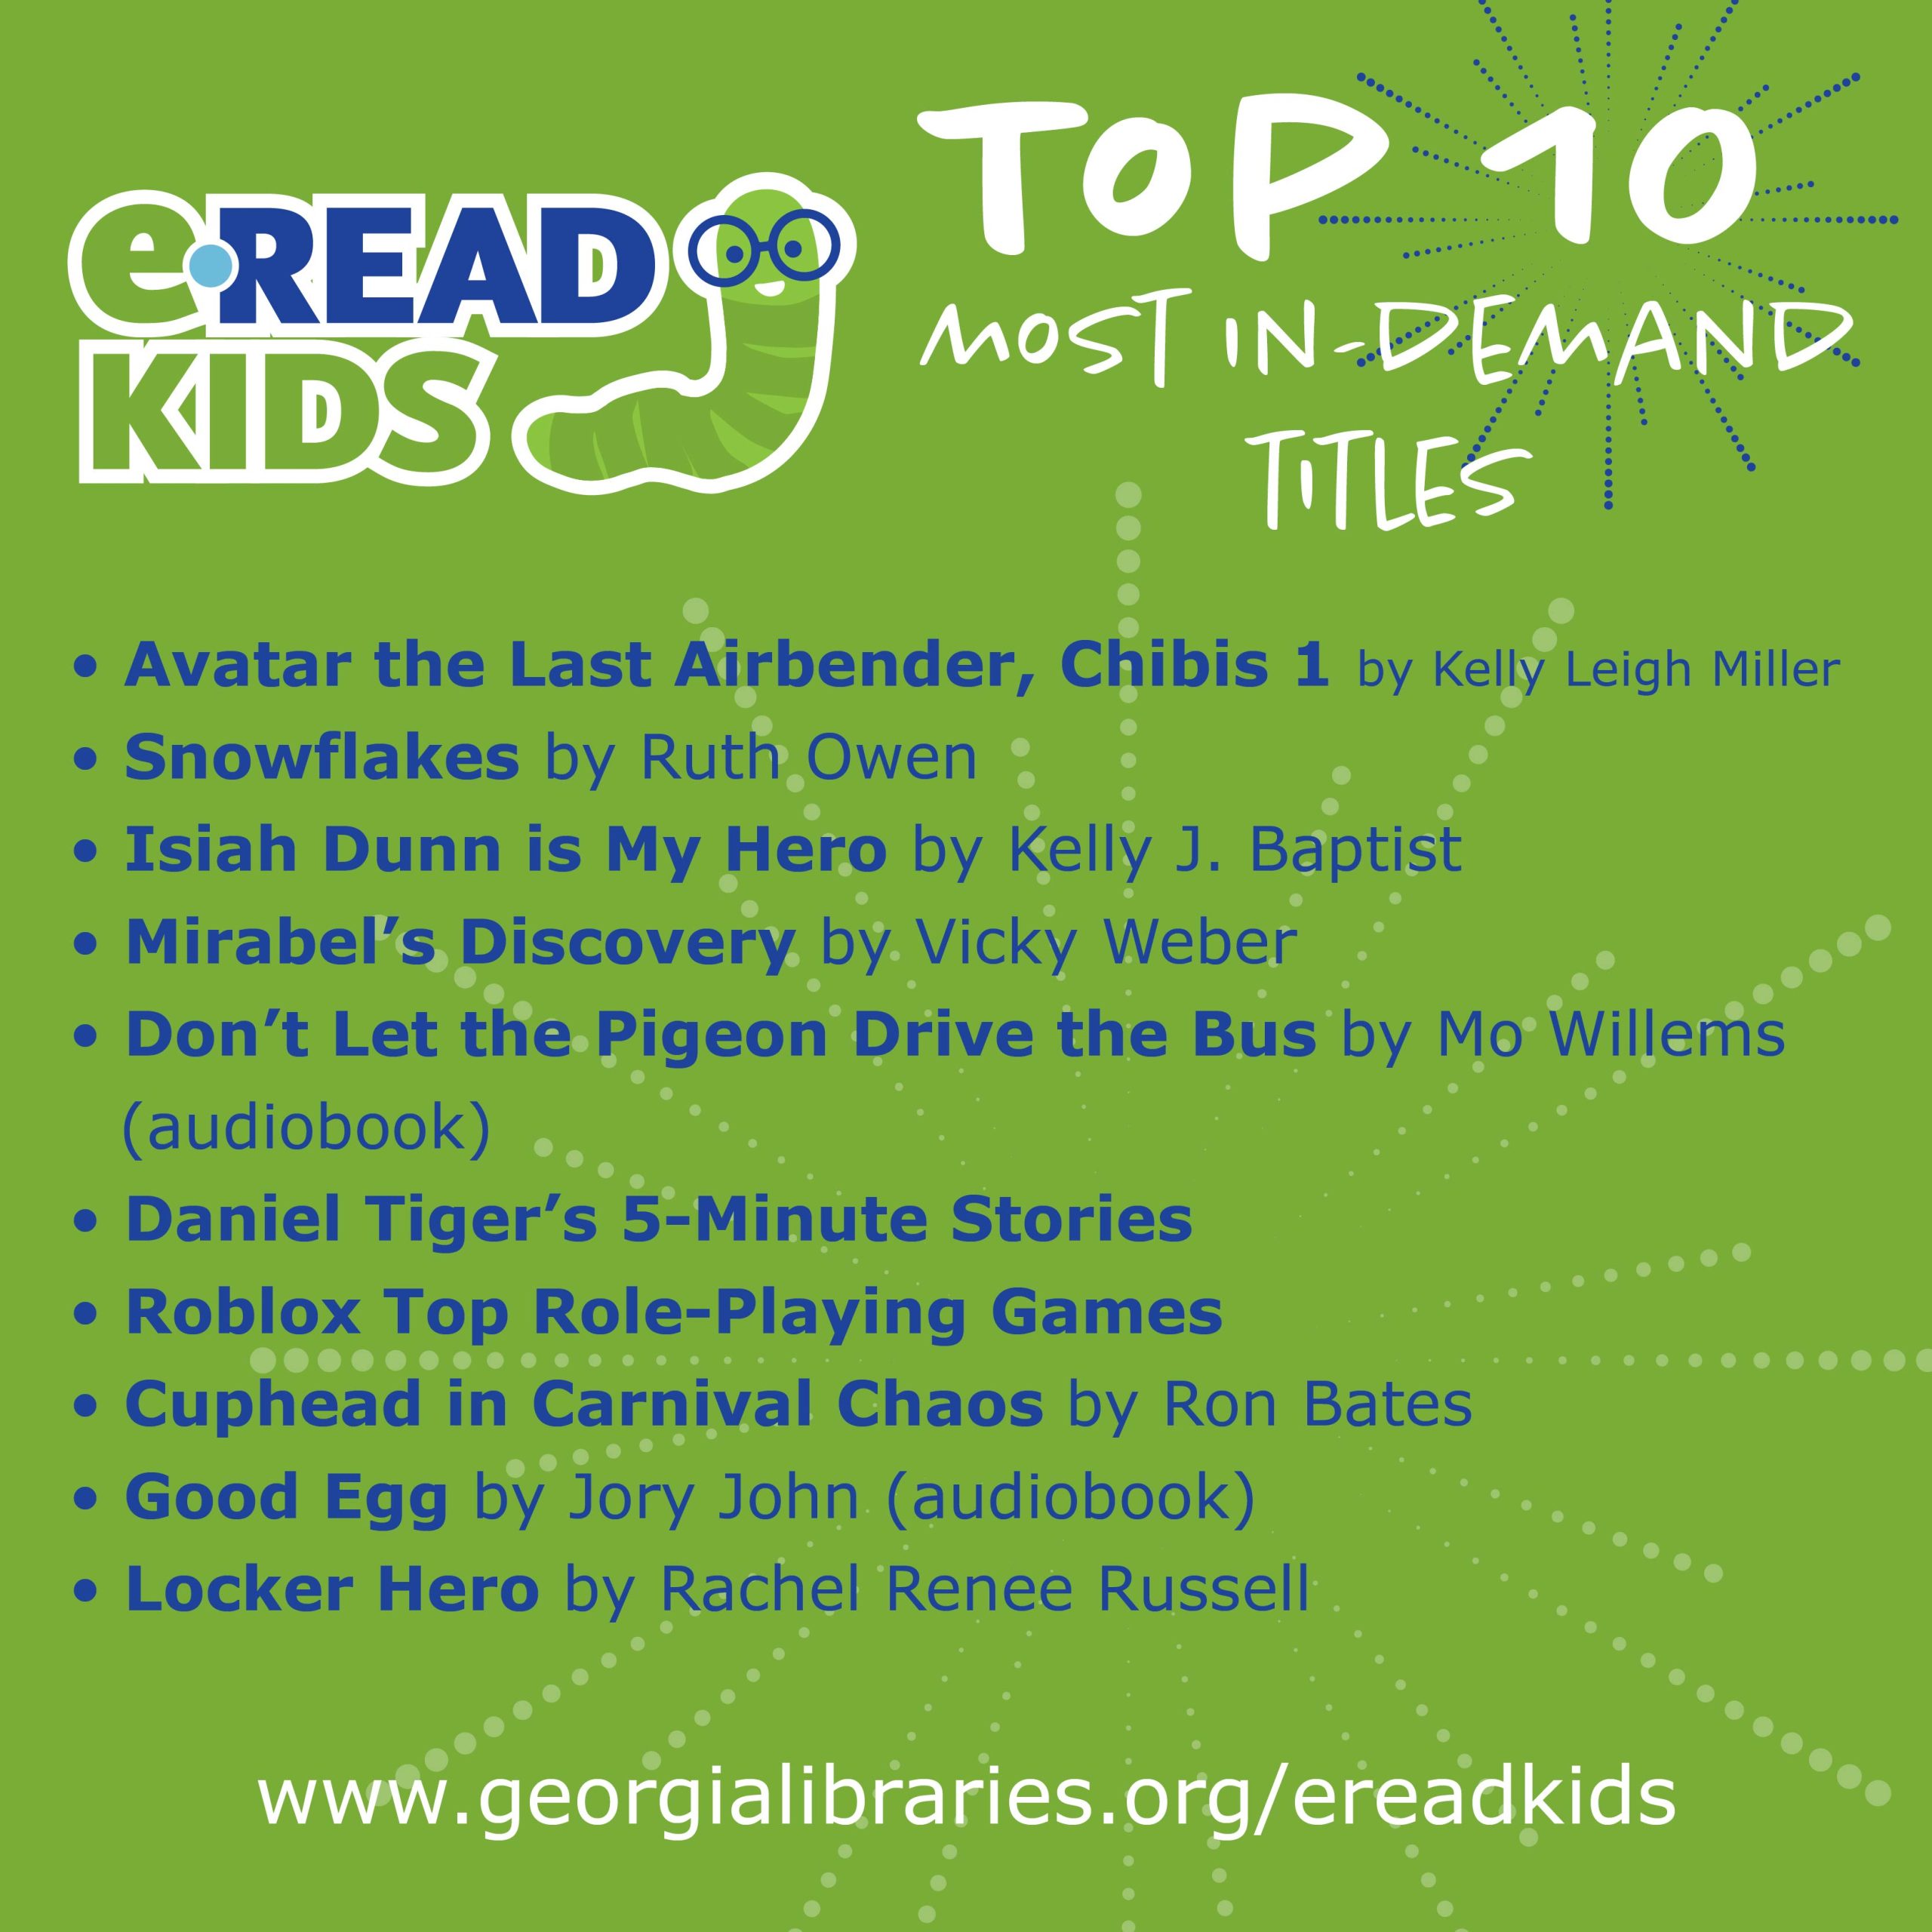 eread kids most popular titles and audiobooks